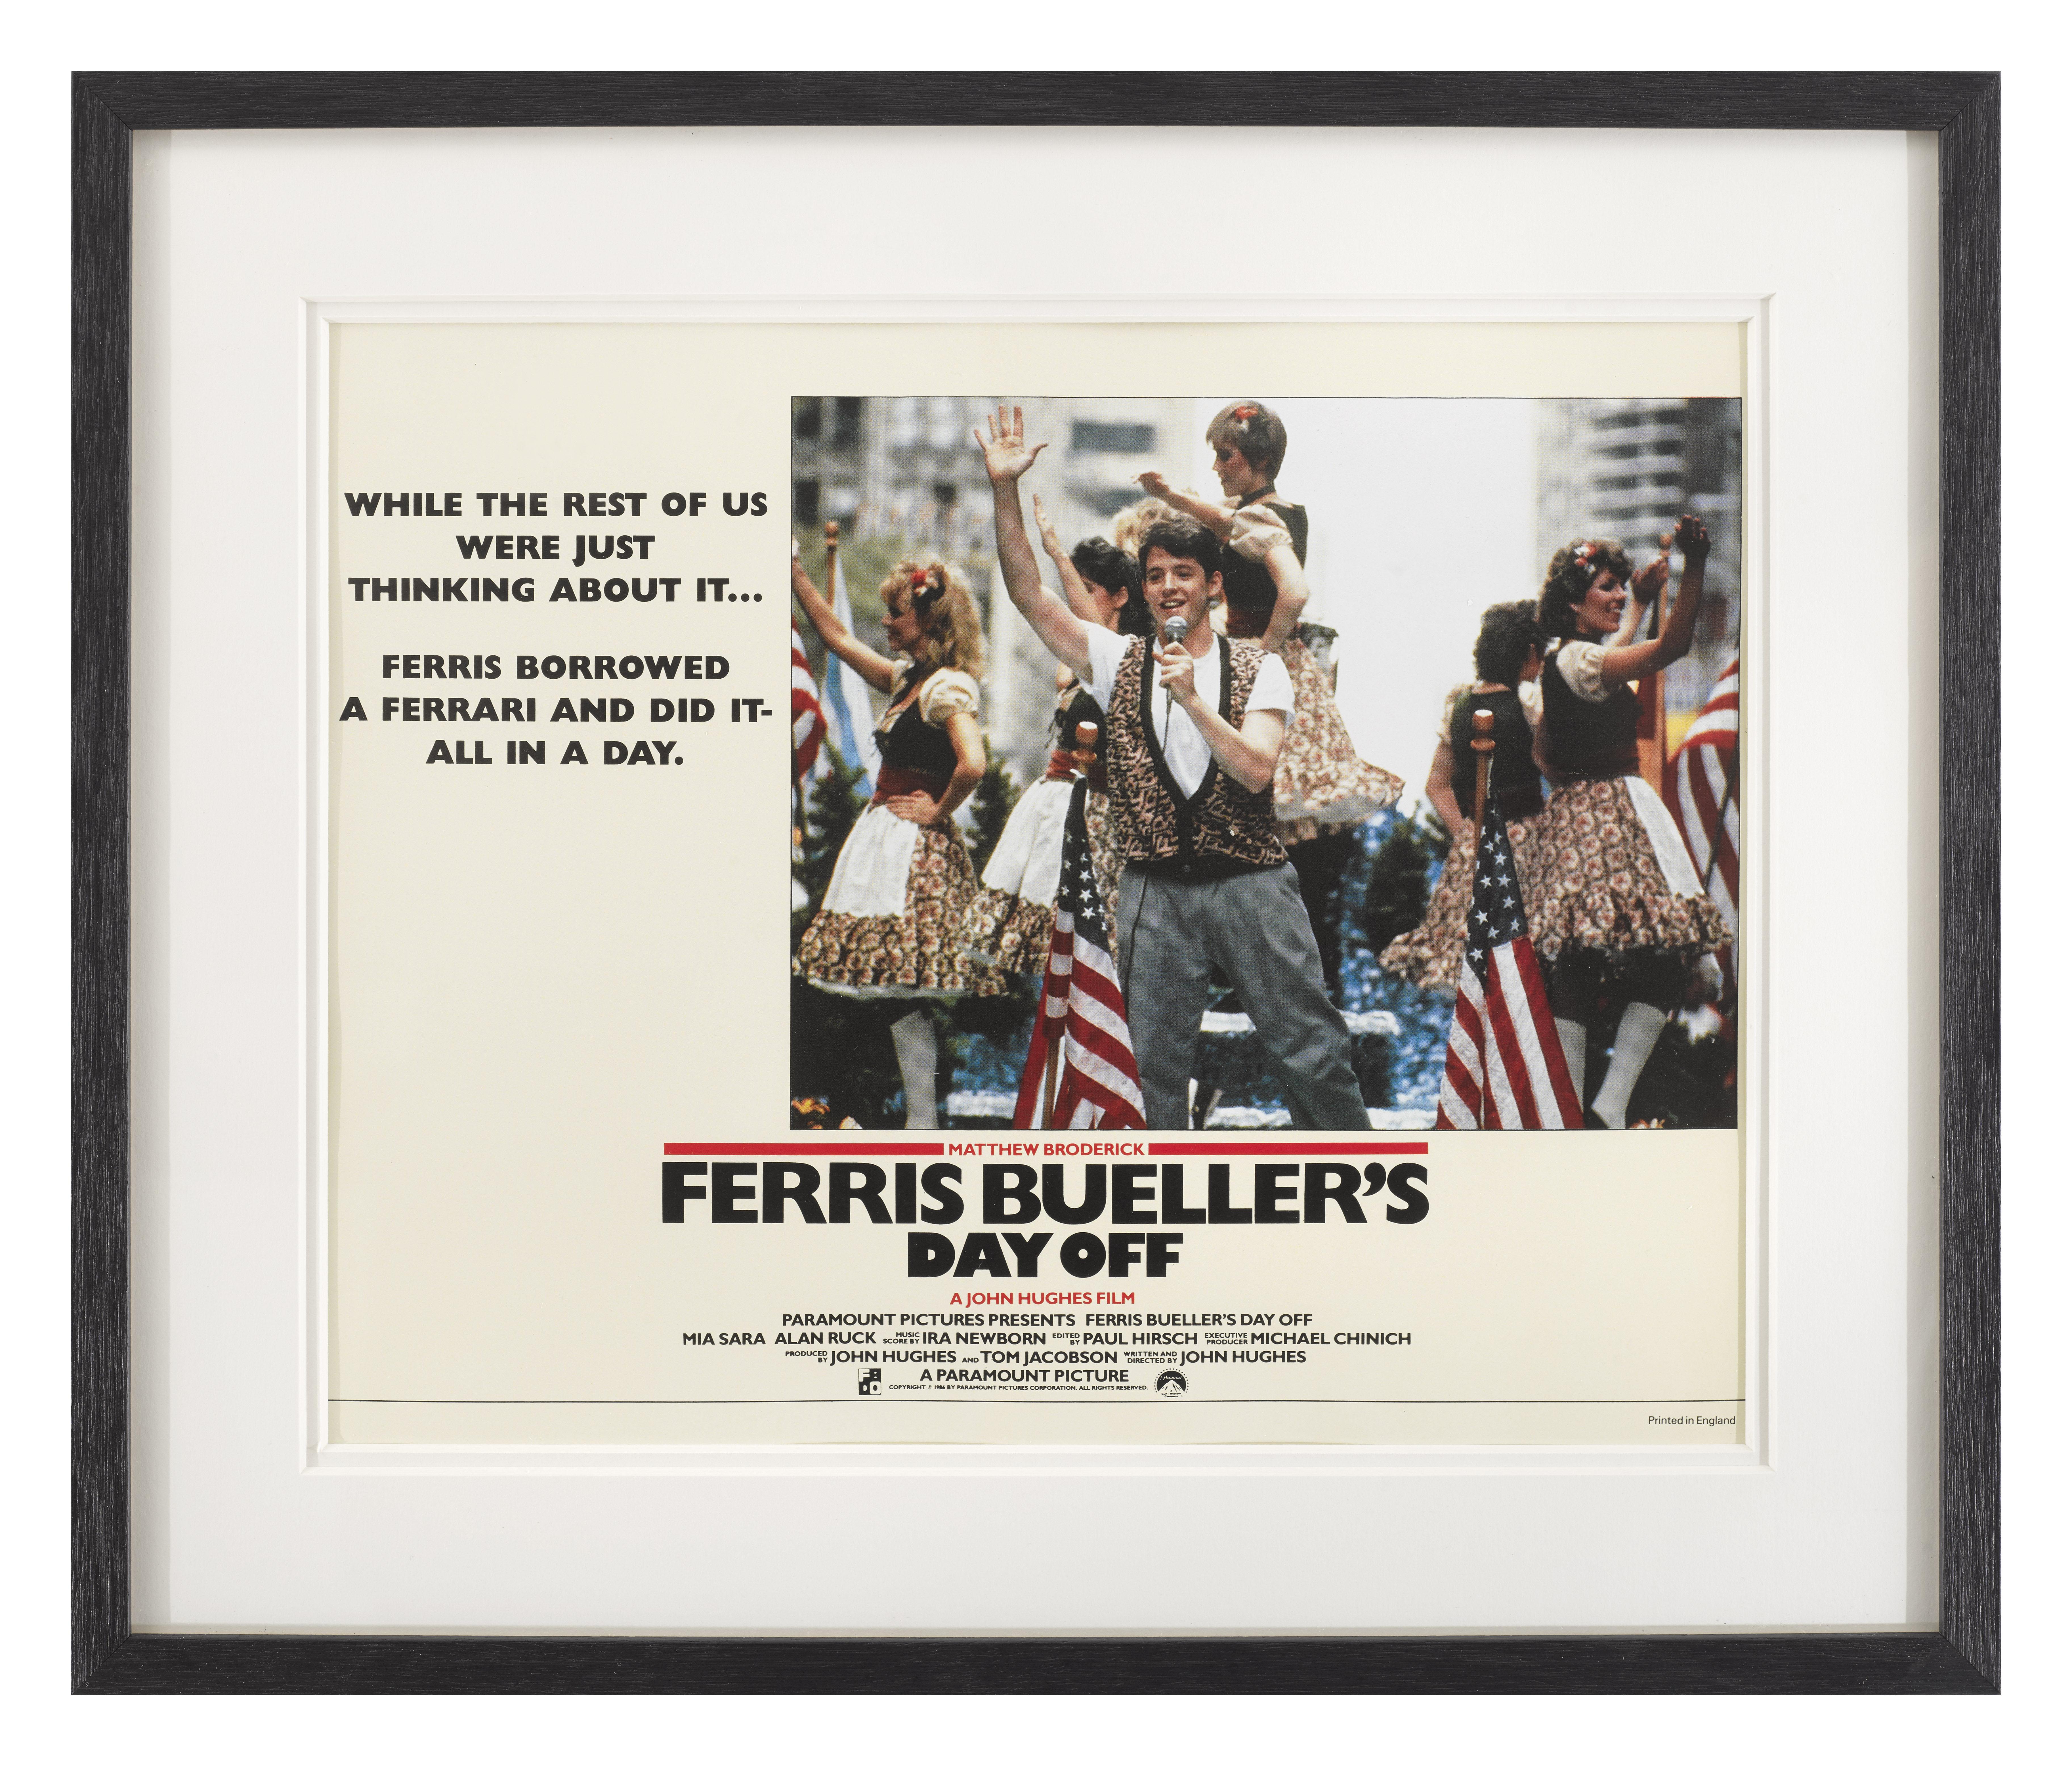 Original British Lobby card for the wonderful 1986 comedy staring
Matthew Broderick, Alan Ruck, Mia Sara. This Lobby card shows the scene of Ferris singing at the parade.